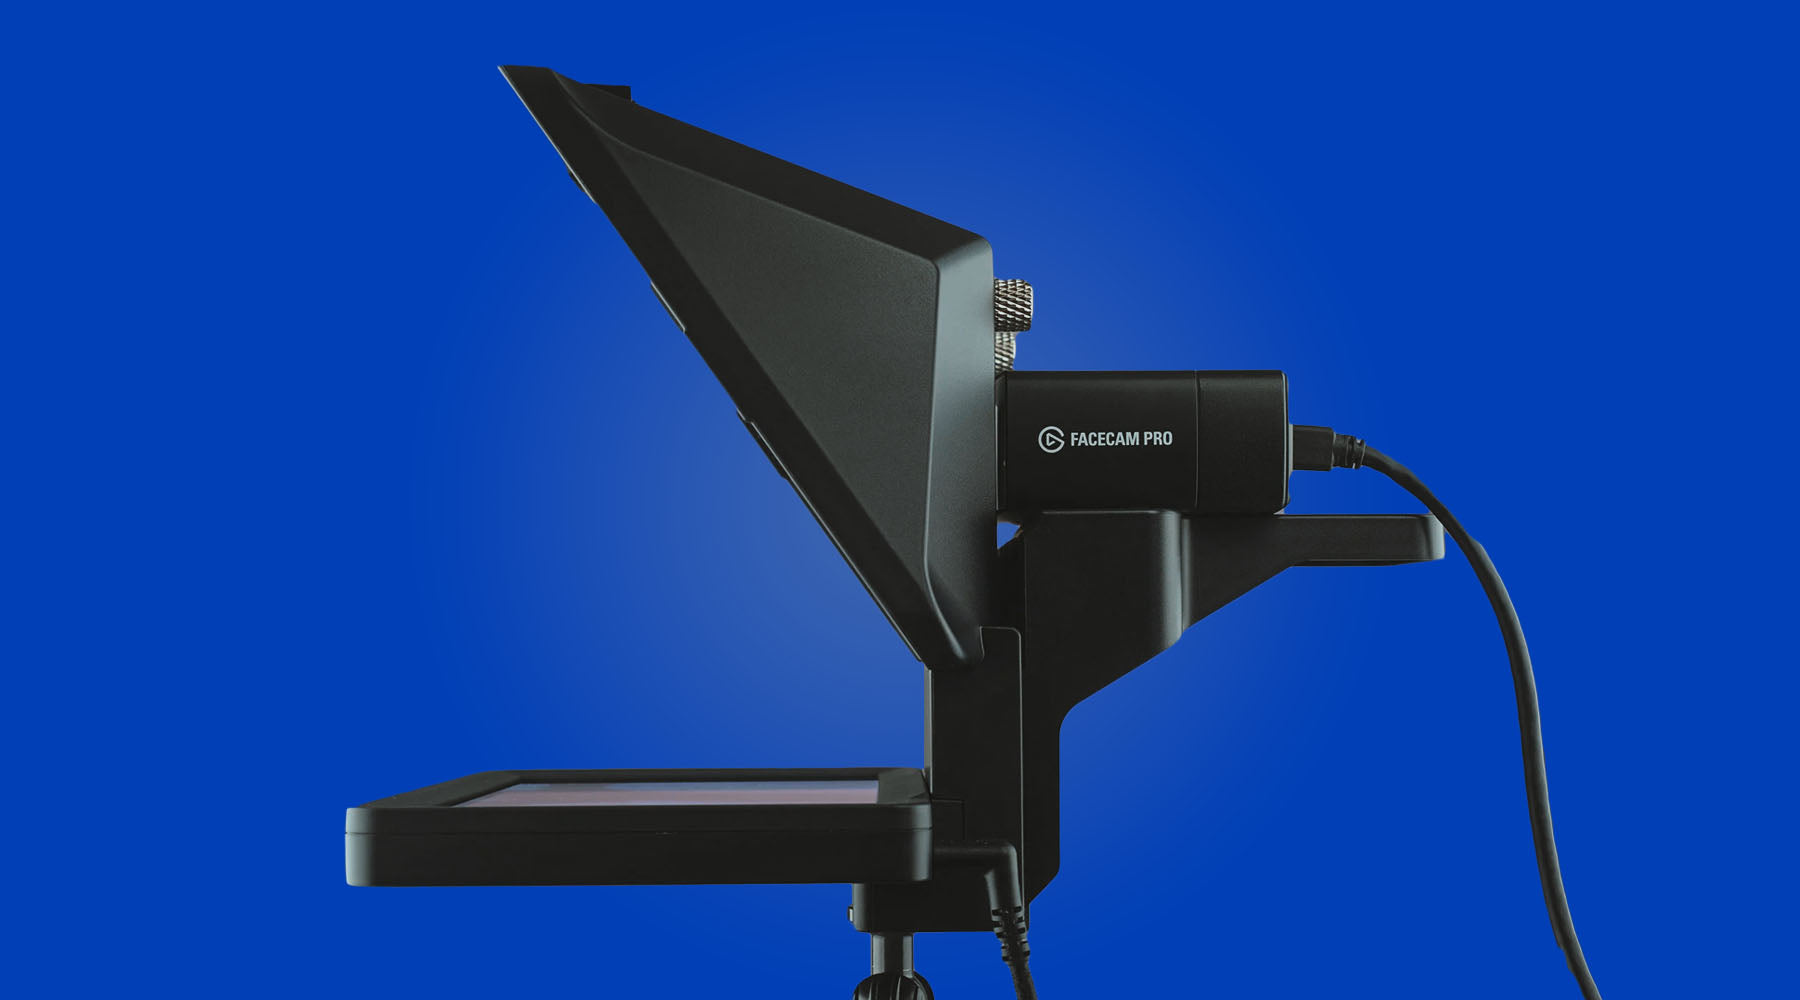 Elgato Prompter — Set up with Webcam, action cam, camcorder or all